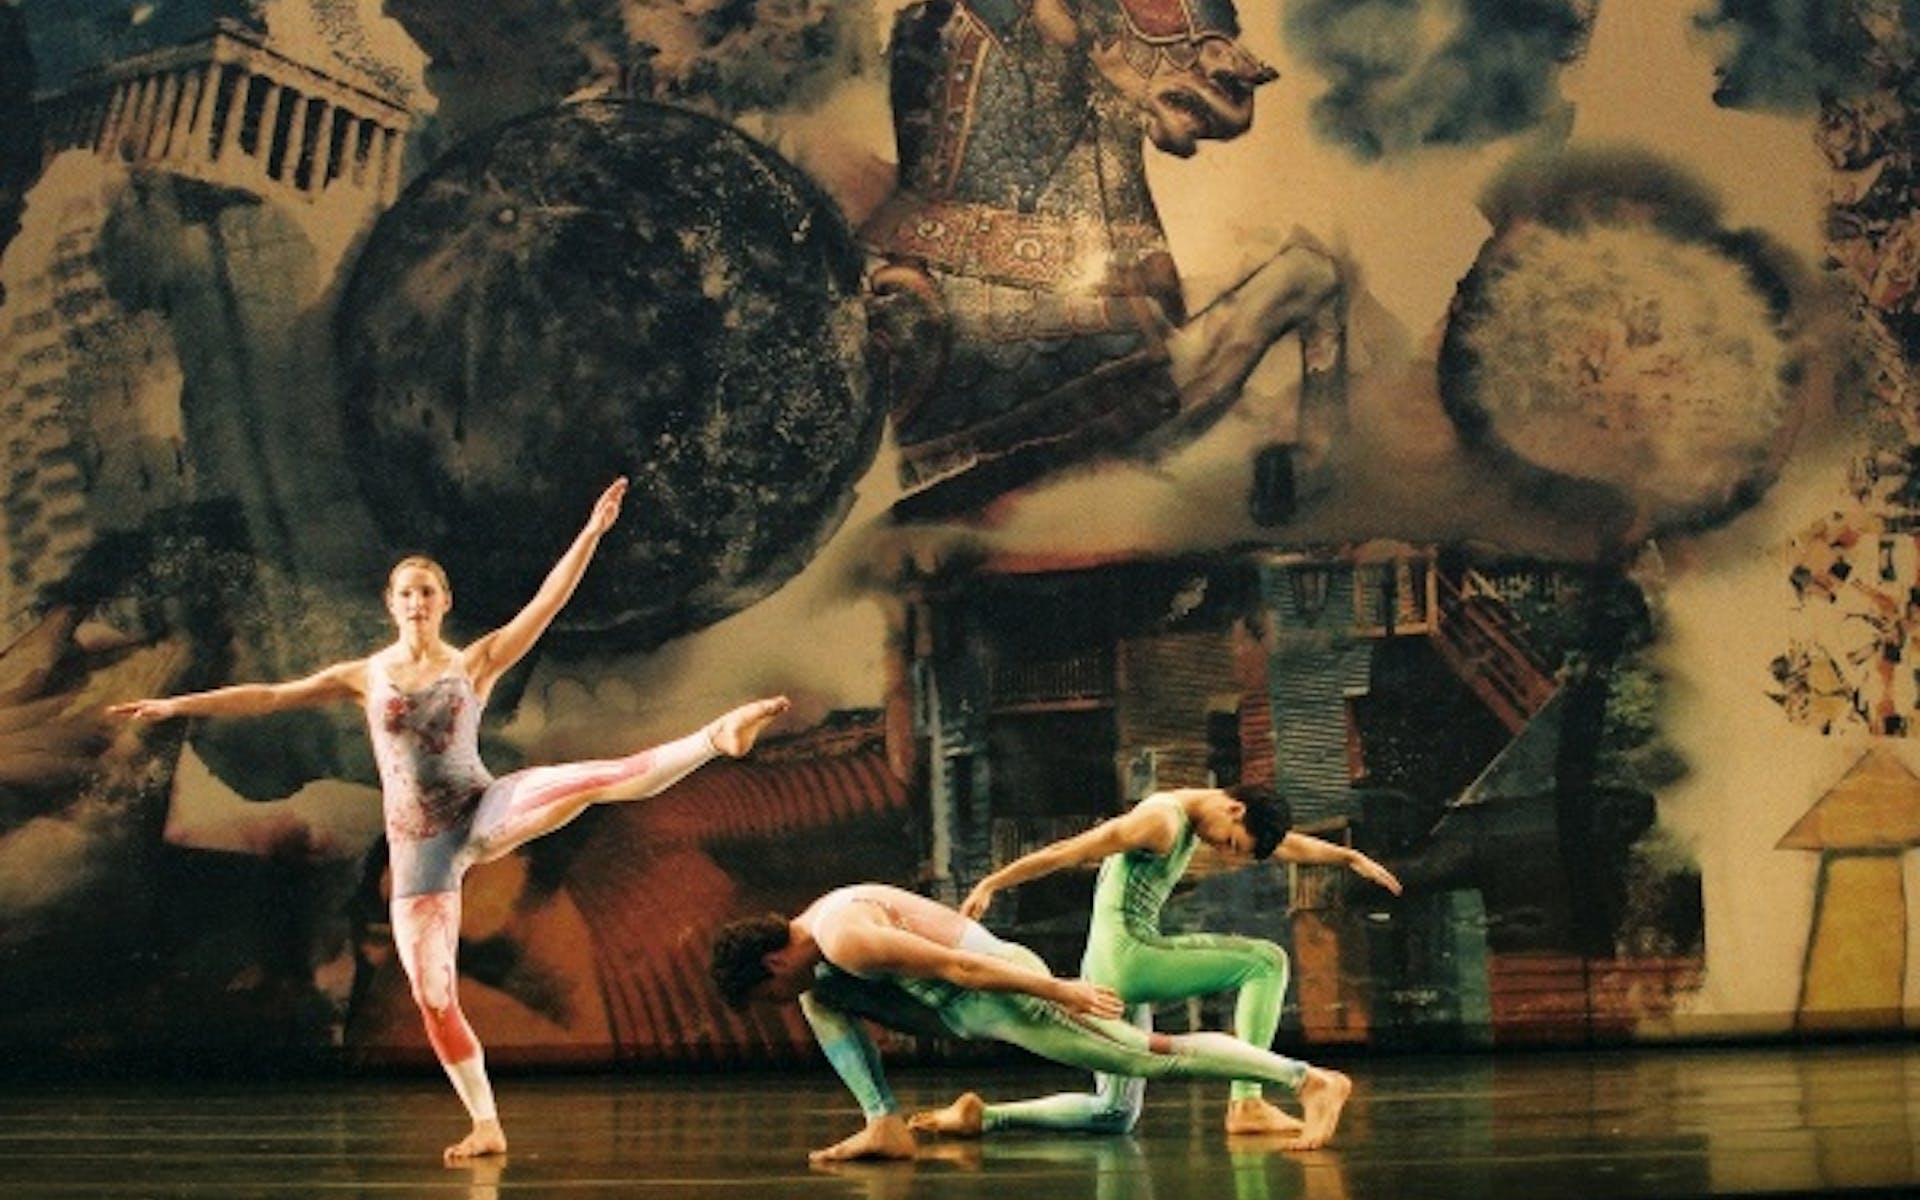 Merce Cunningham Dance Company performing Interscape (2000), with costumes and décor by Robert Rauschenberg